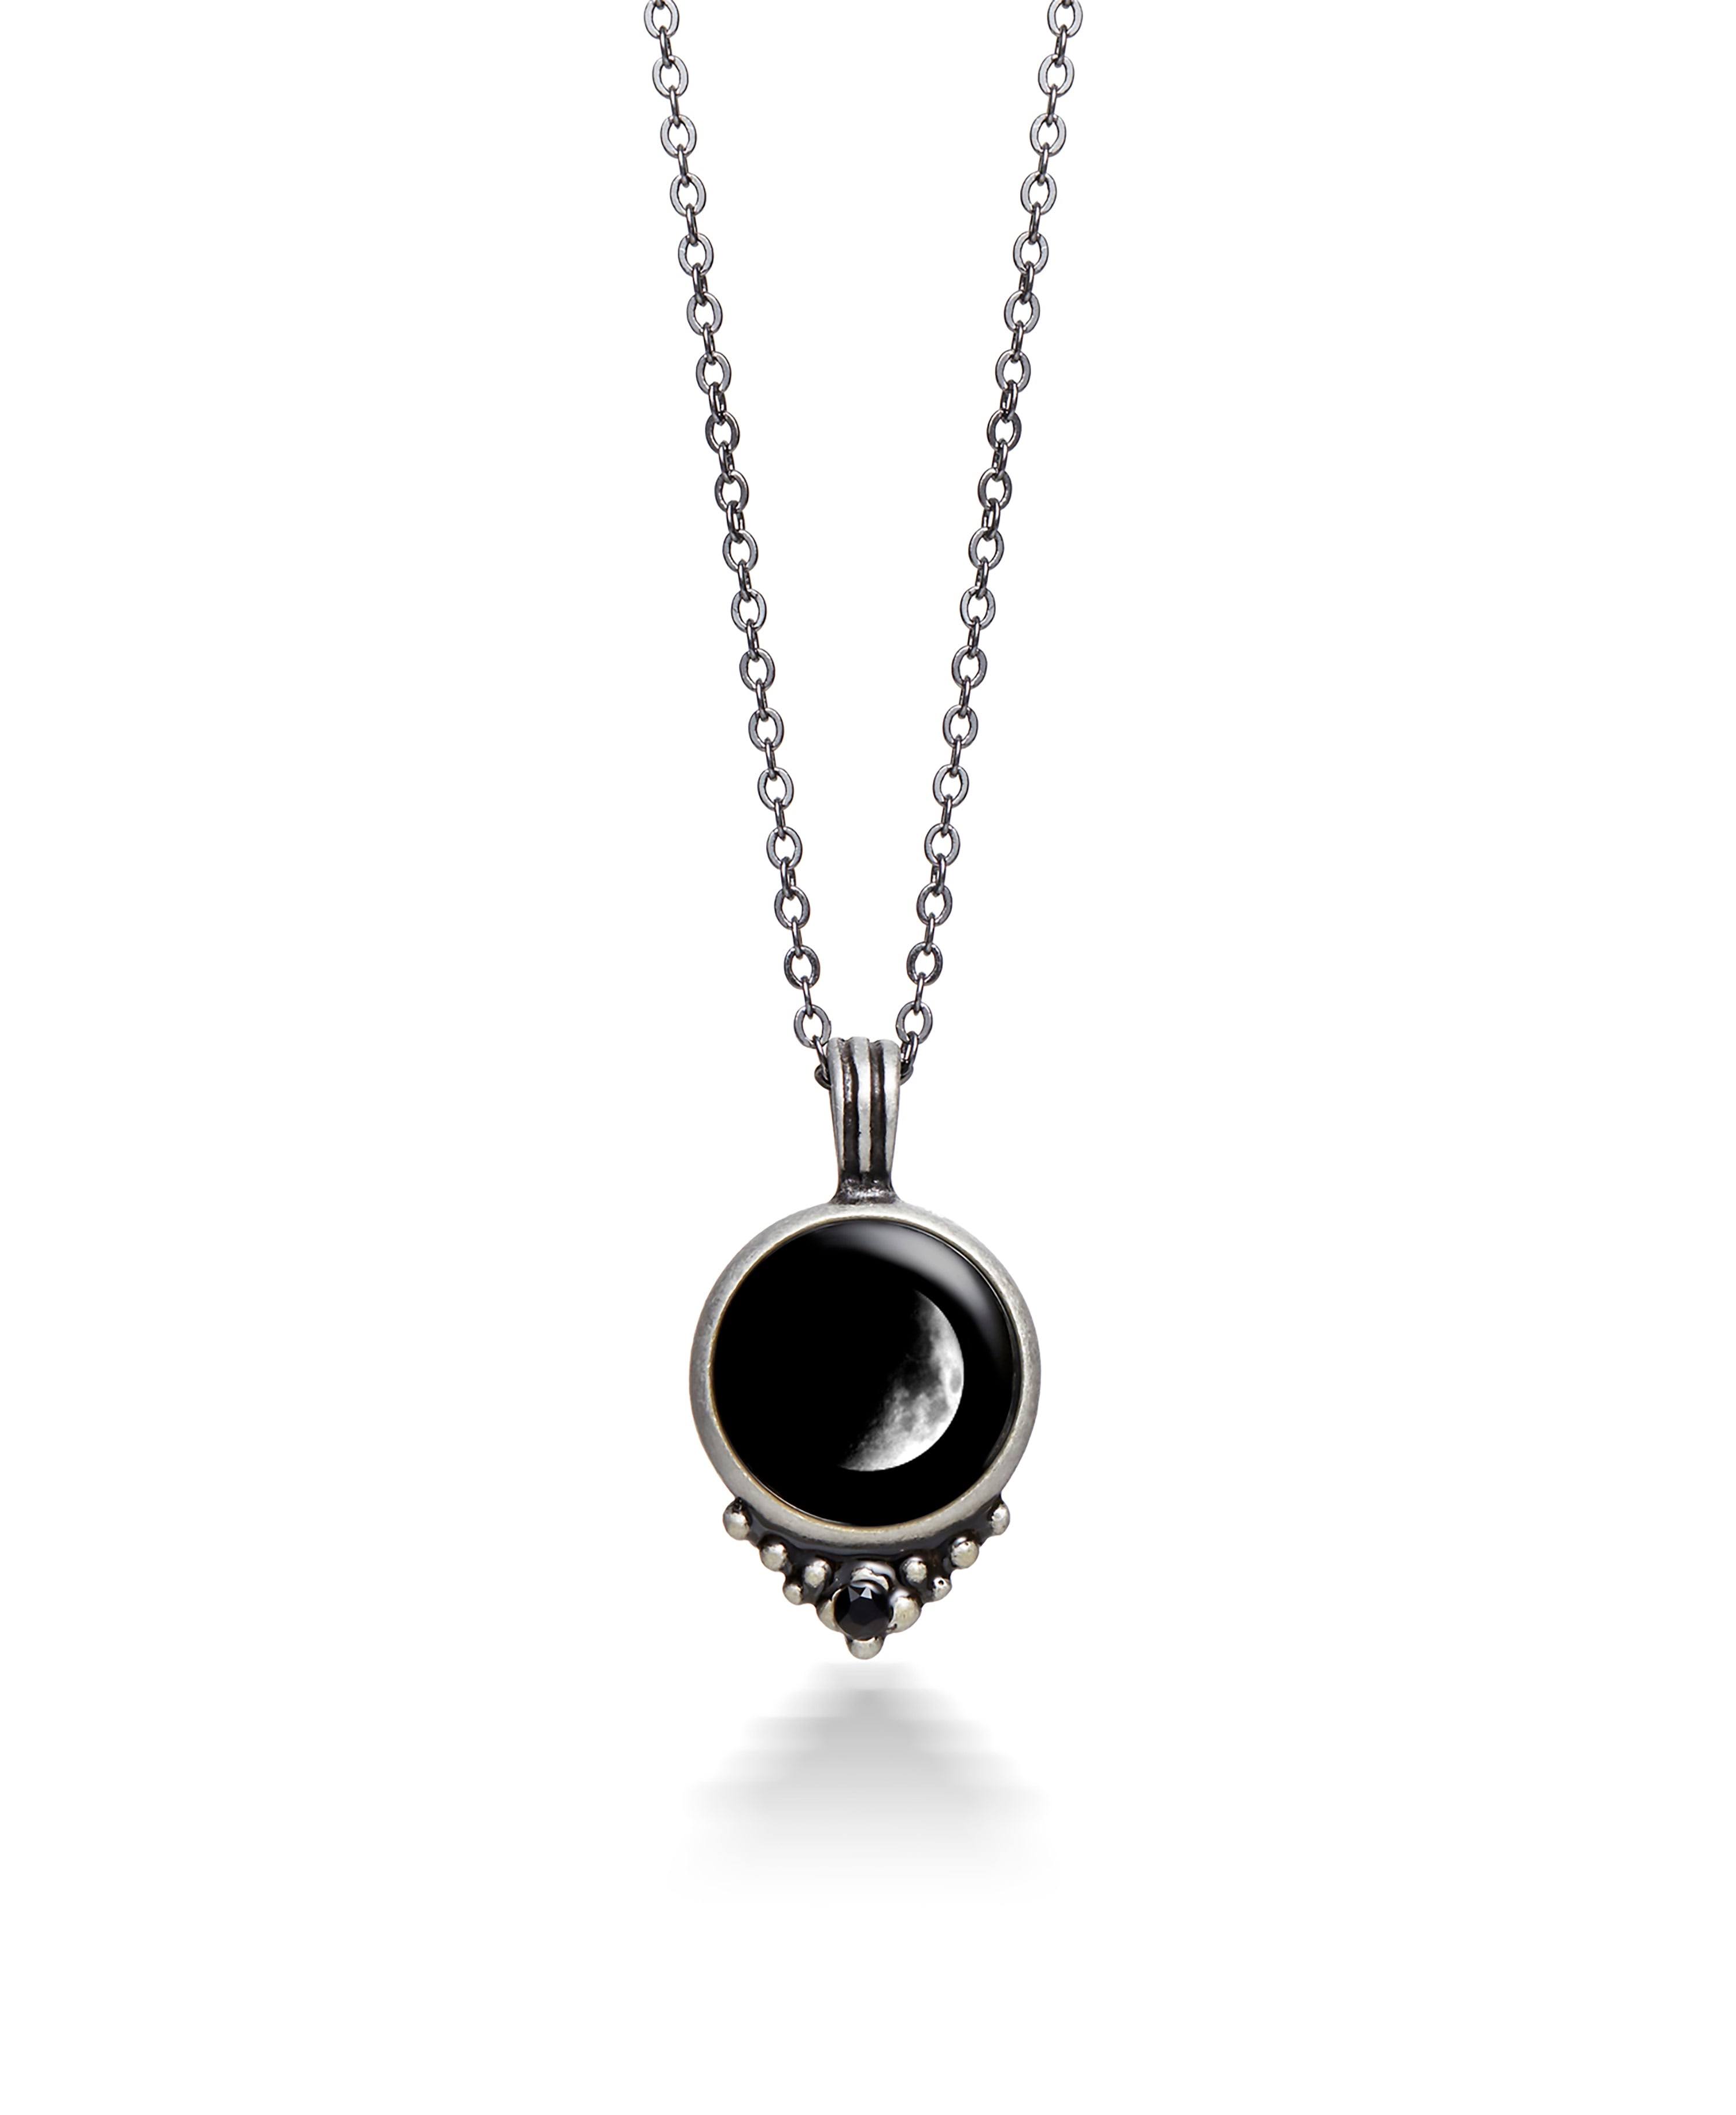 Moonglow Classic Pewter Necklace 2A